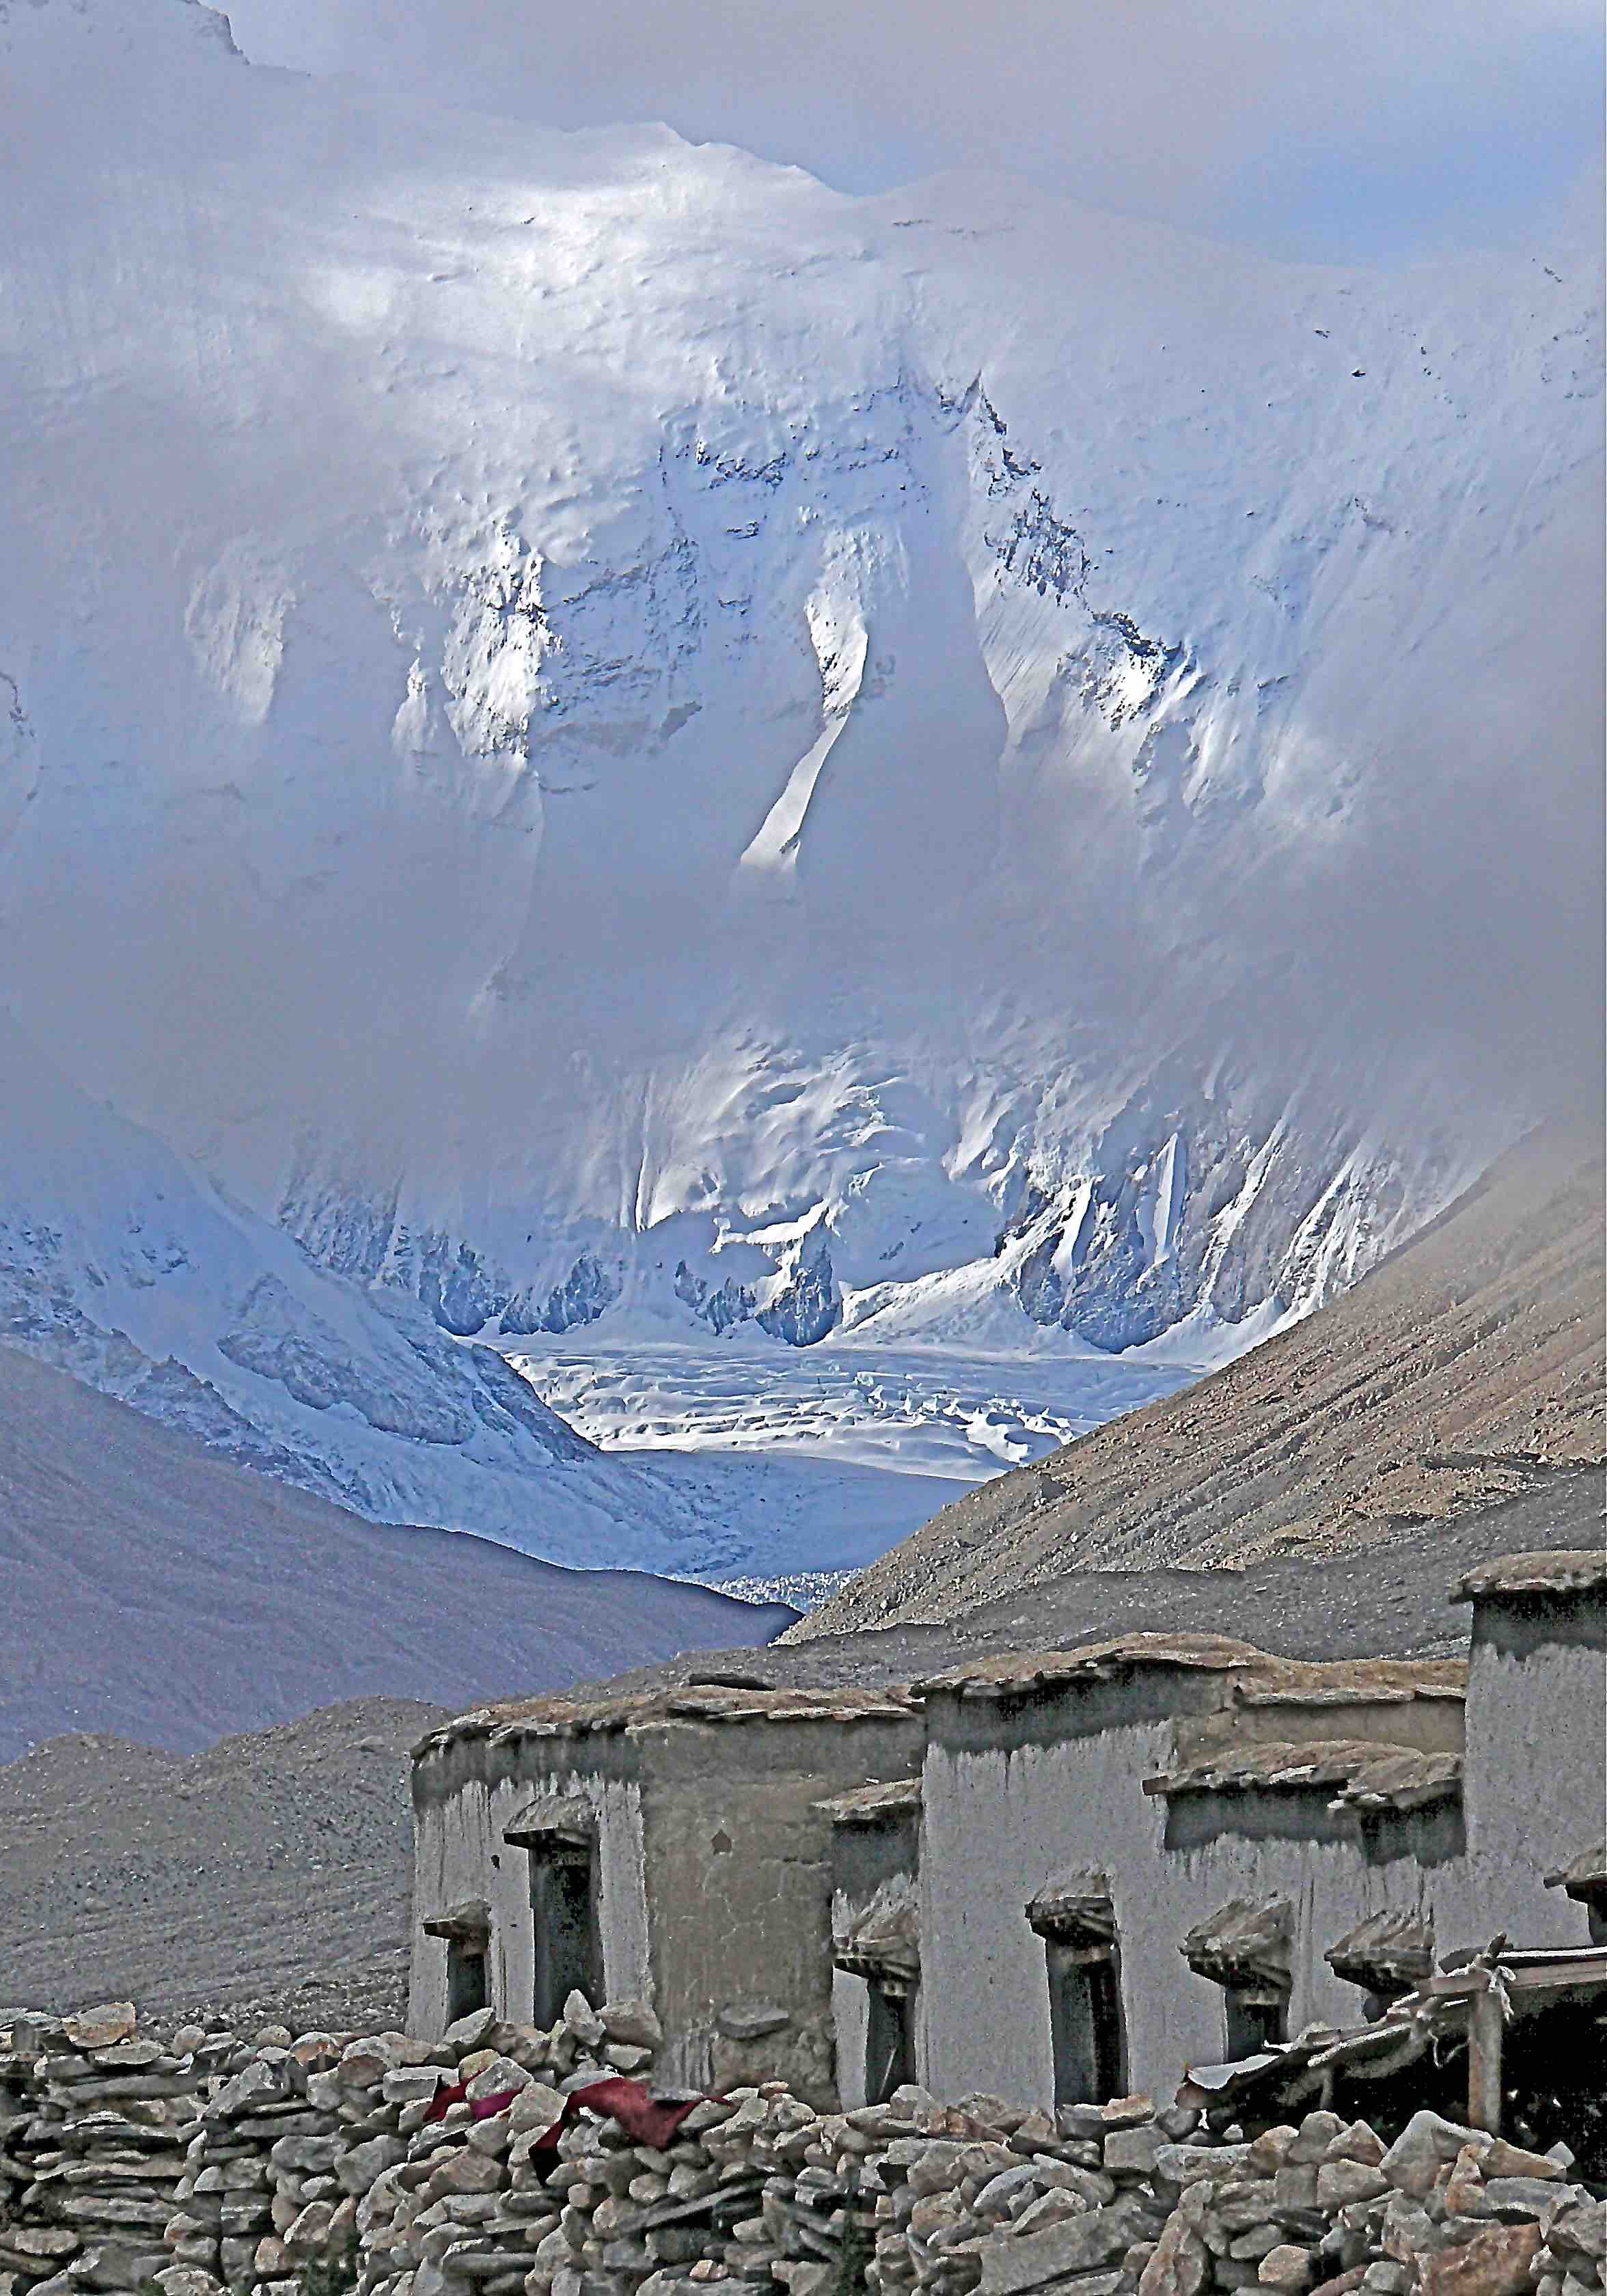 CAC The Buddhist nunnery at Everest - Mike Tompkins PHOTO.jpg